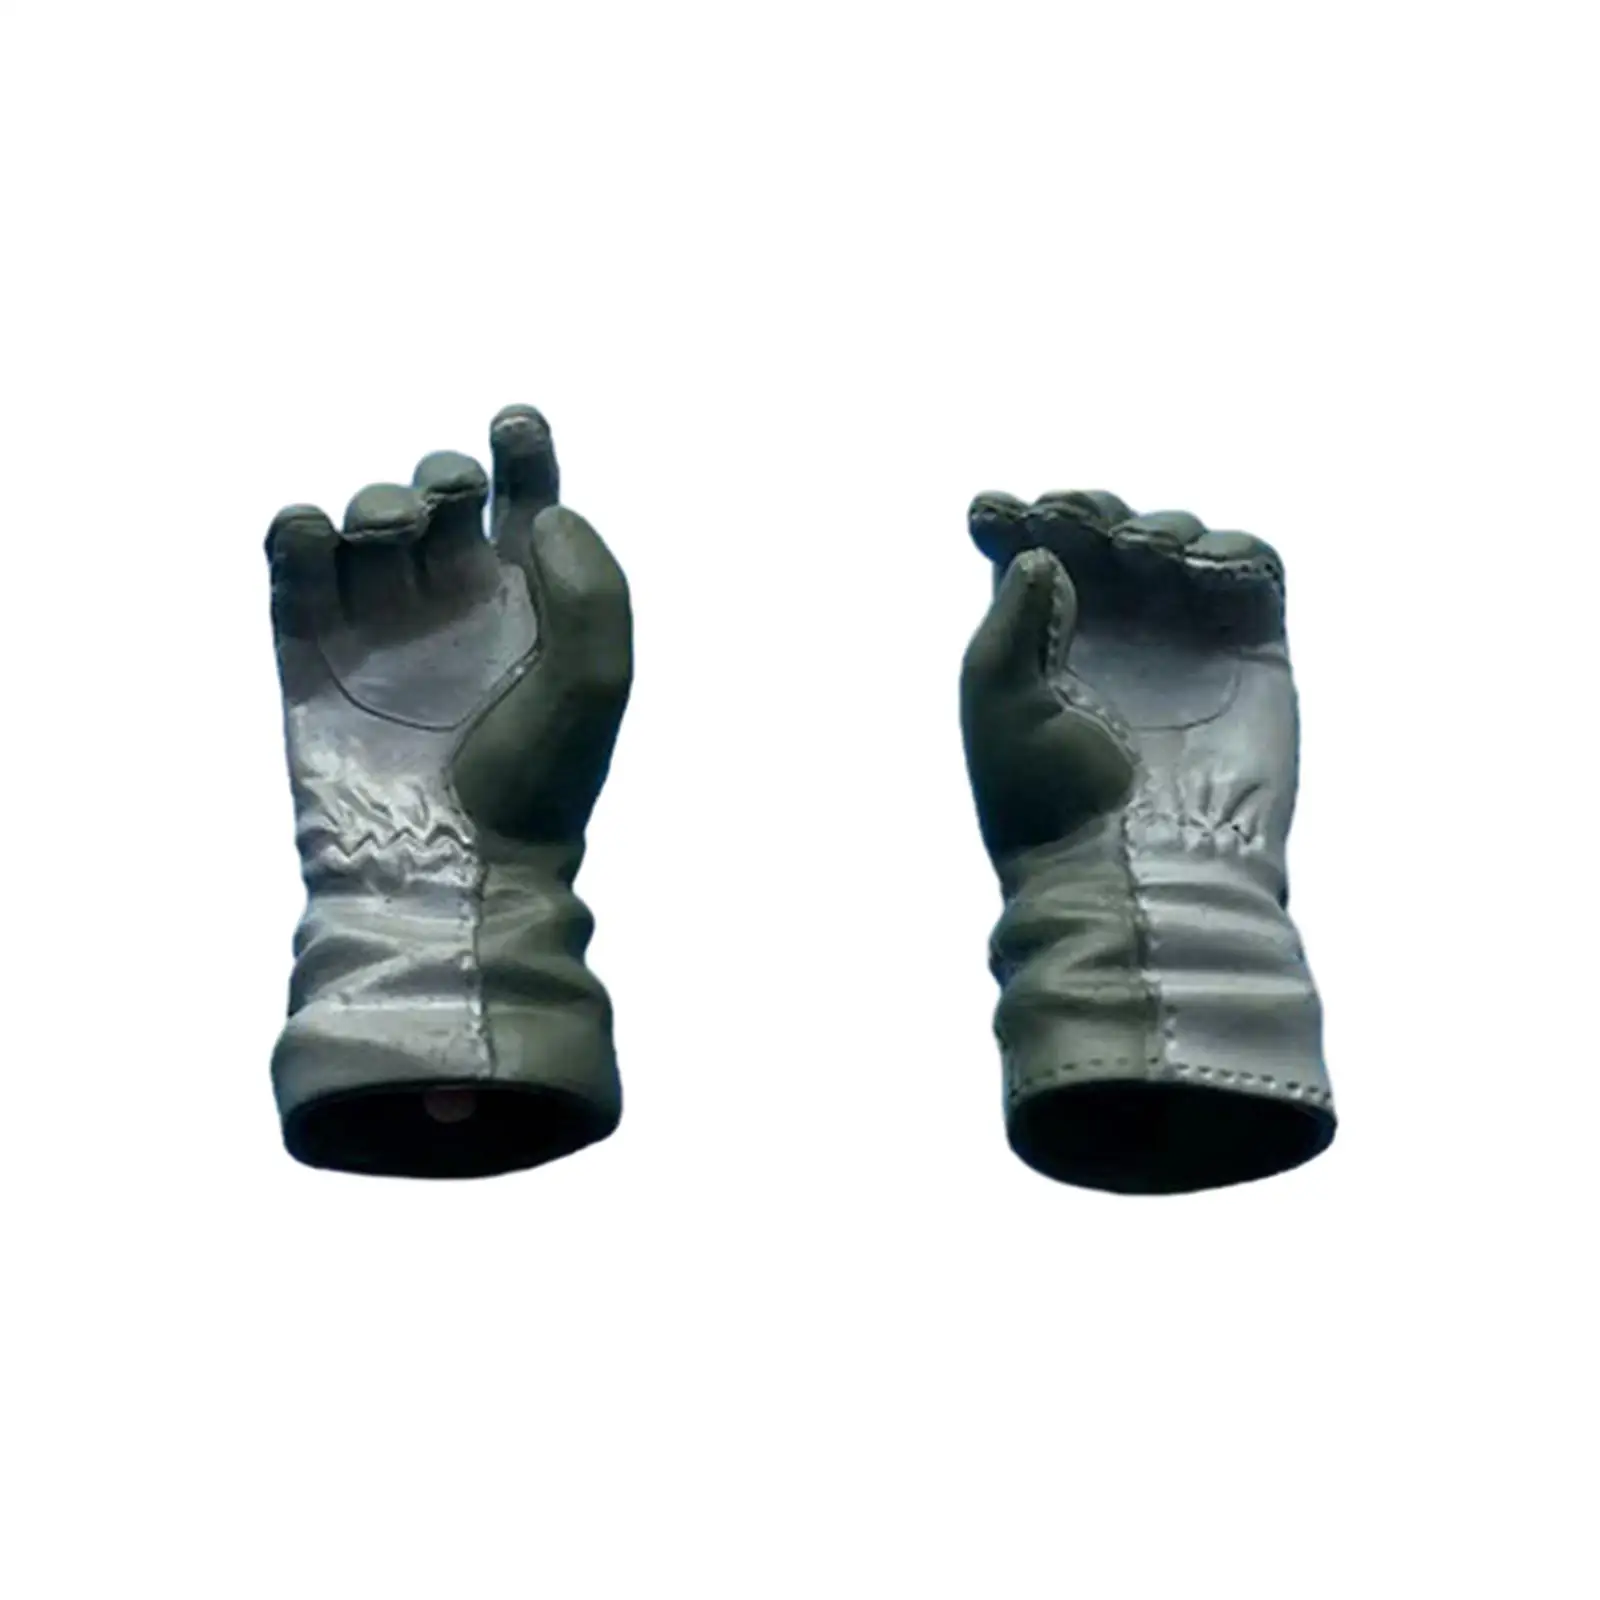 1/6 Scale Figure Gloves Model Collectible Doll Accessories Durable Costume Accessory Miniature for 12inch Soldier Figures